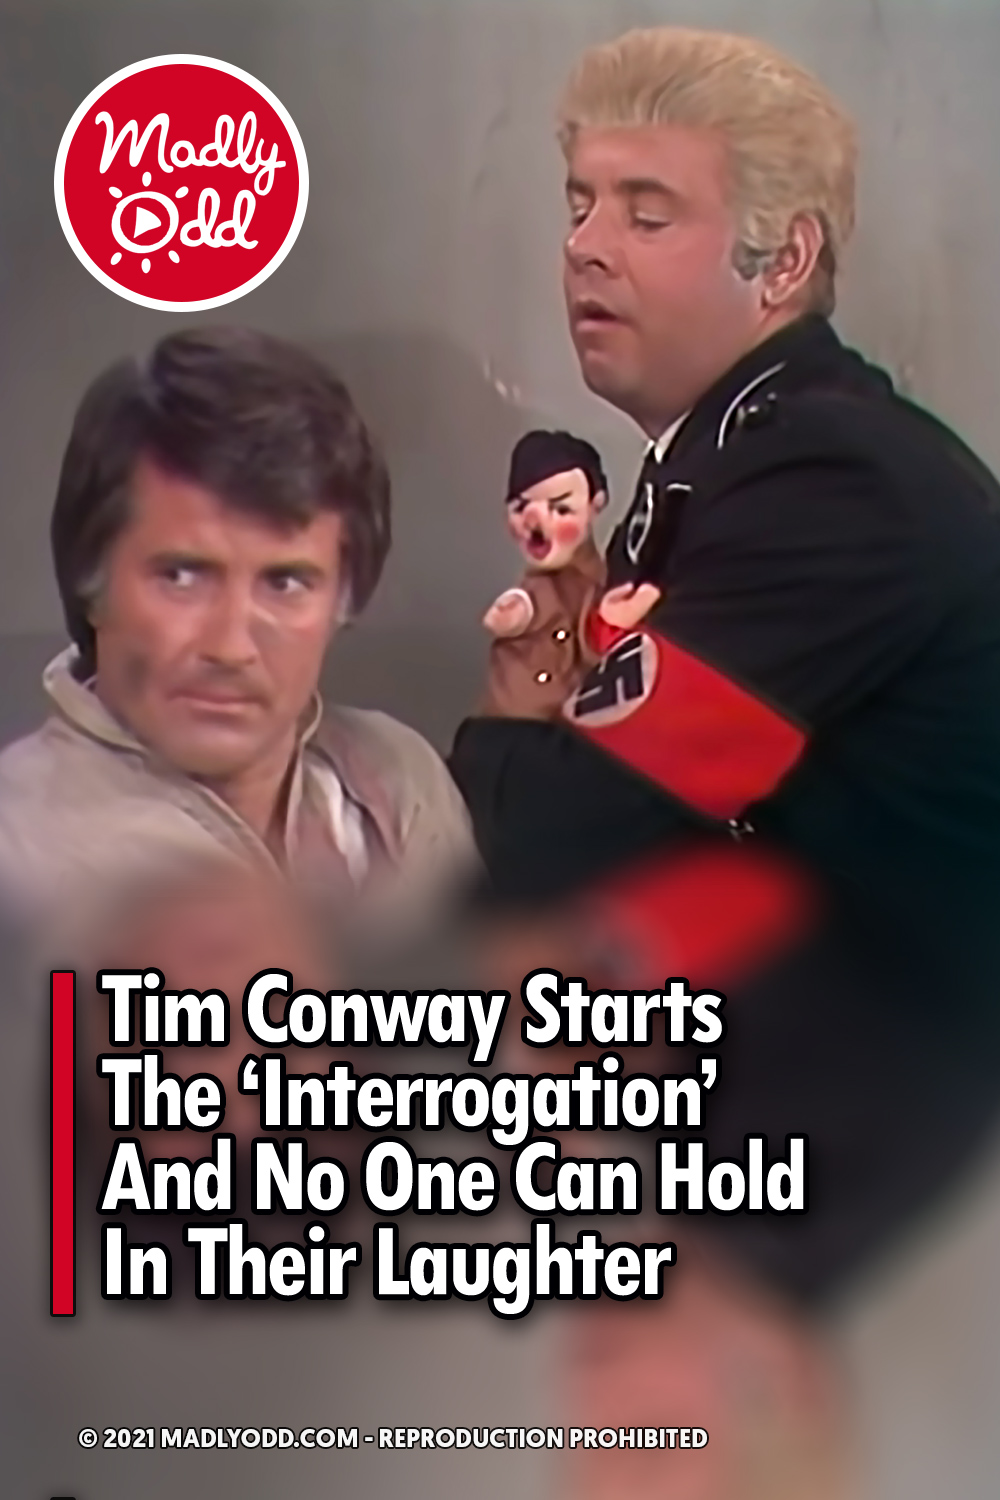 Tim Conway Starts The \'Interrogation\' And No One Can Hold In Their Laughter